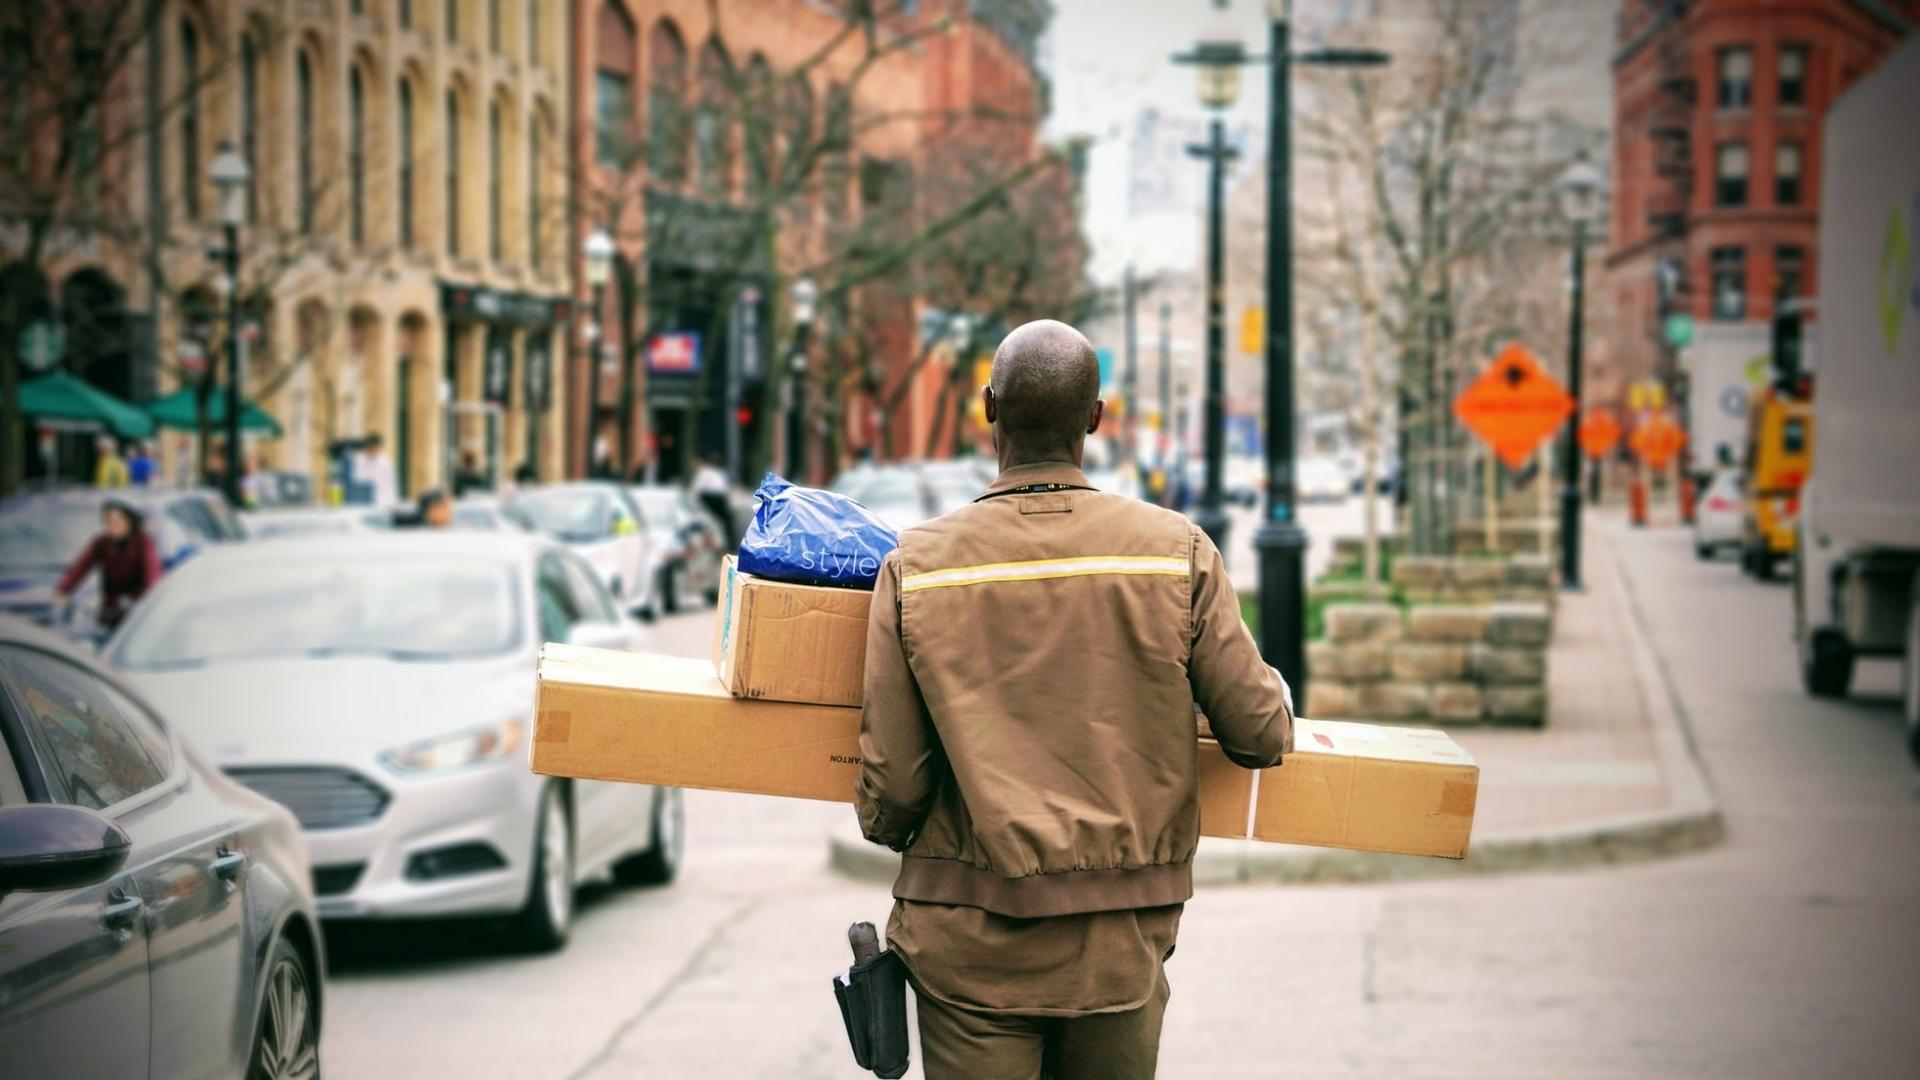 6 Skills you will Rock as a Delivery Driver